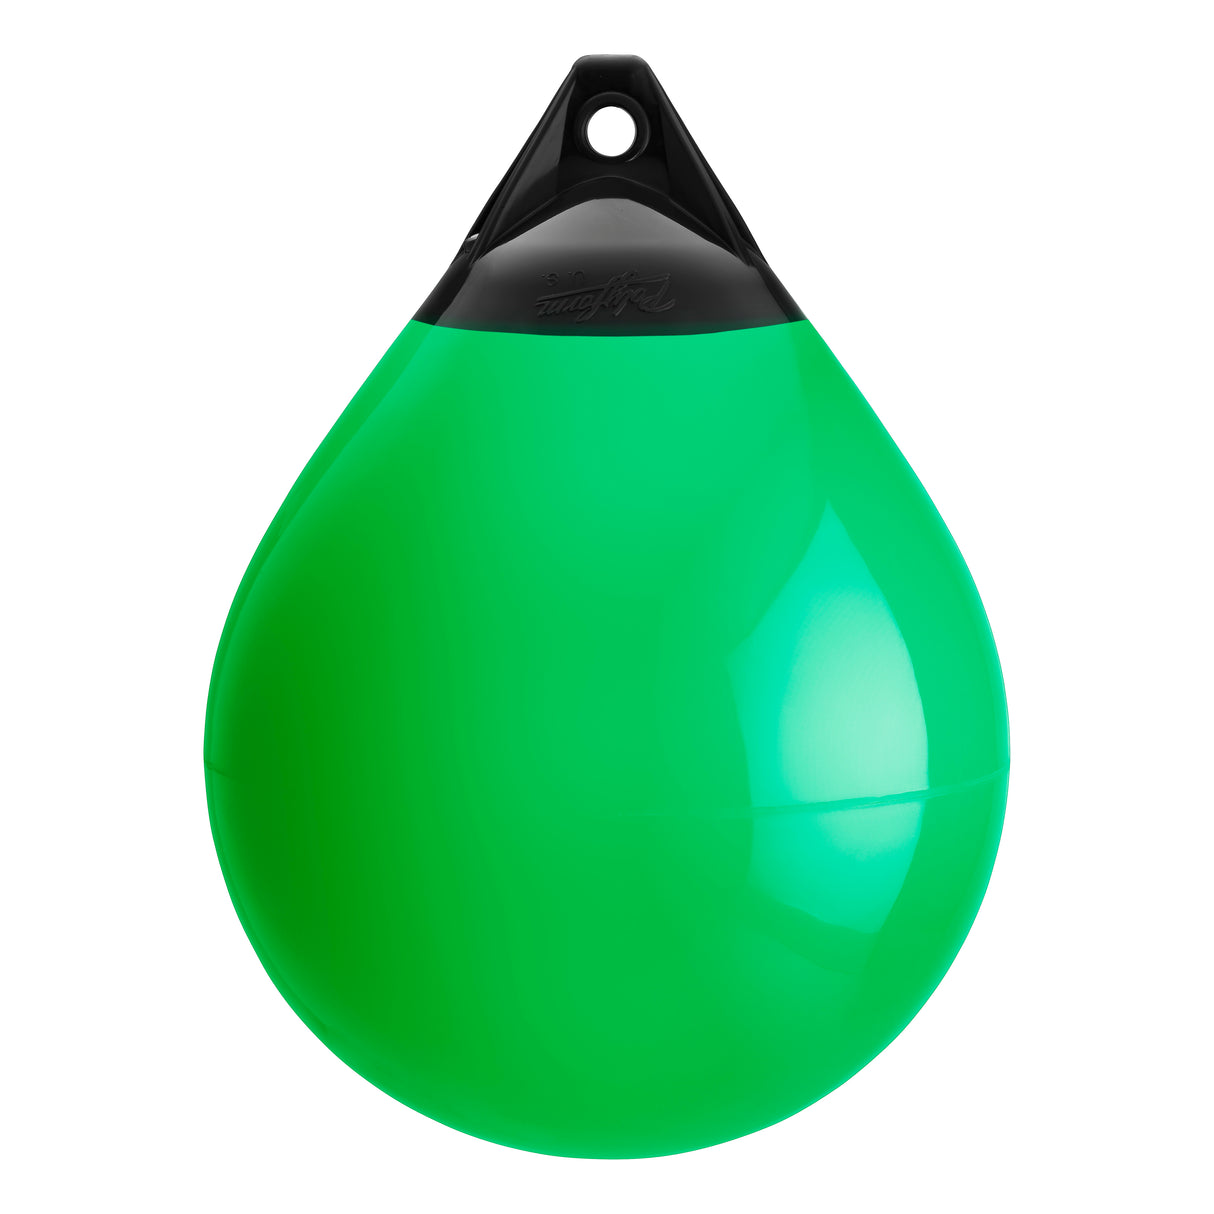 Green buoy with Black-Top, Polyform A-4